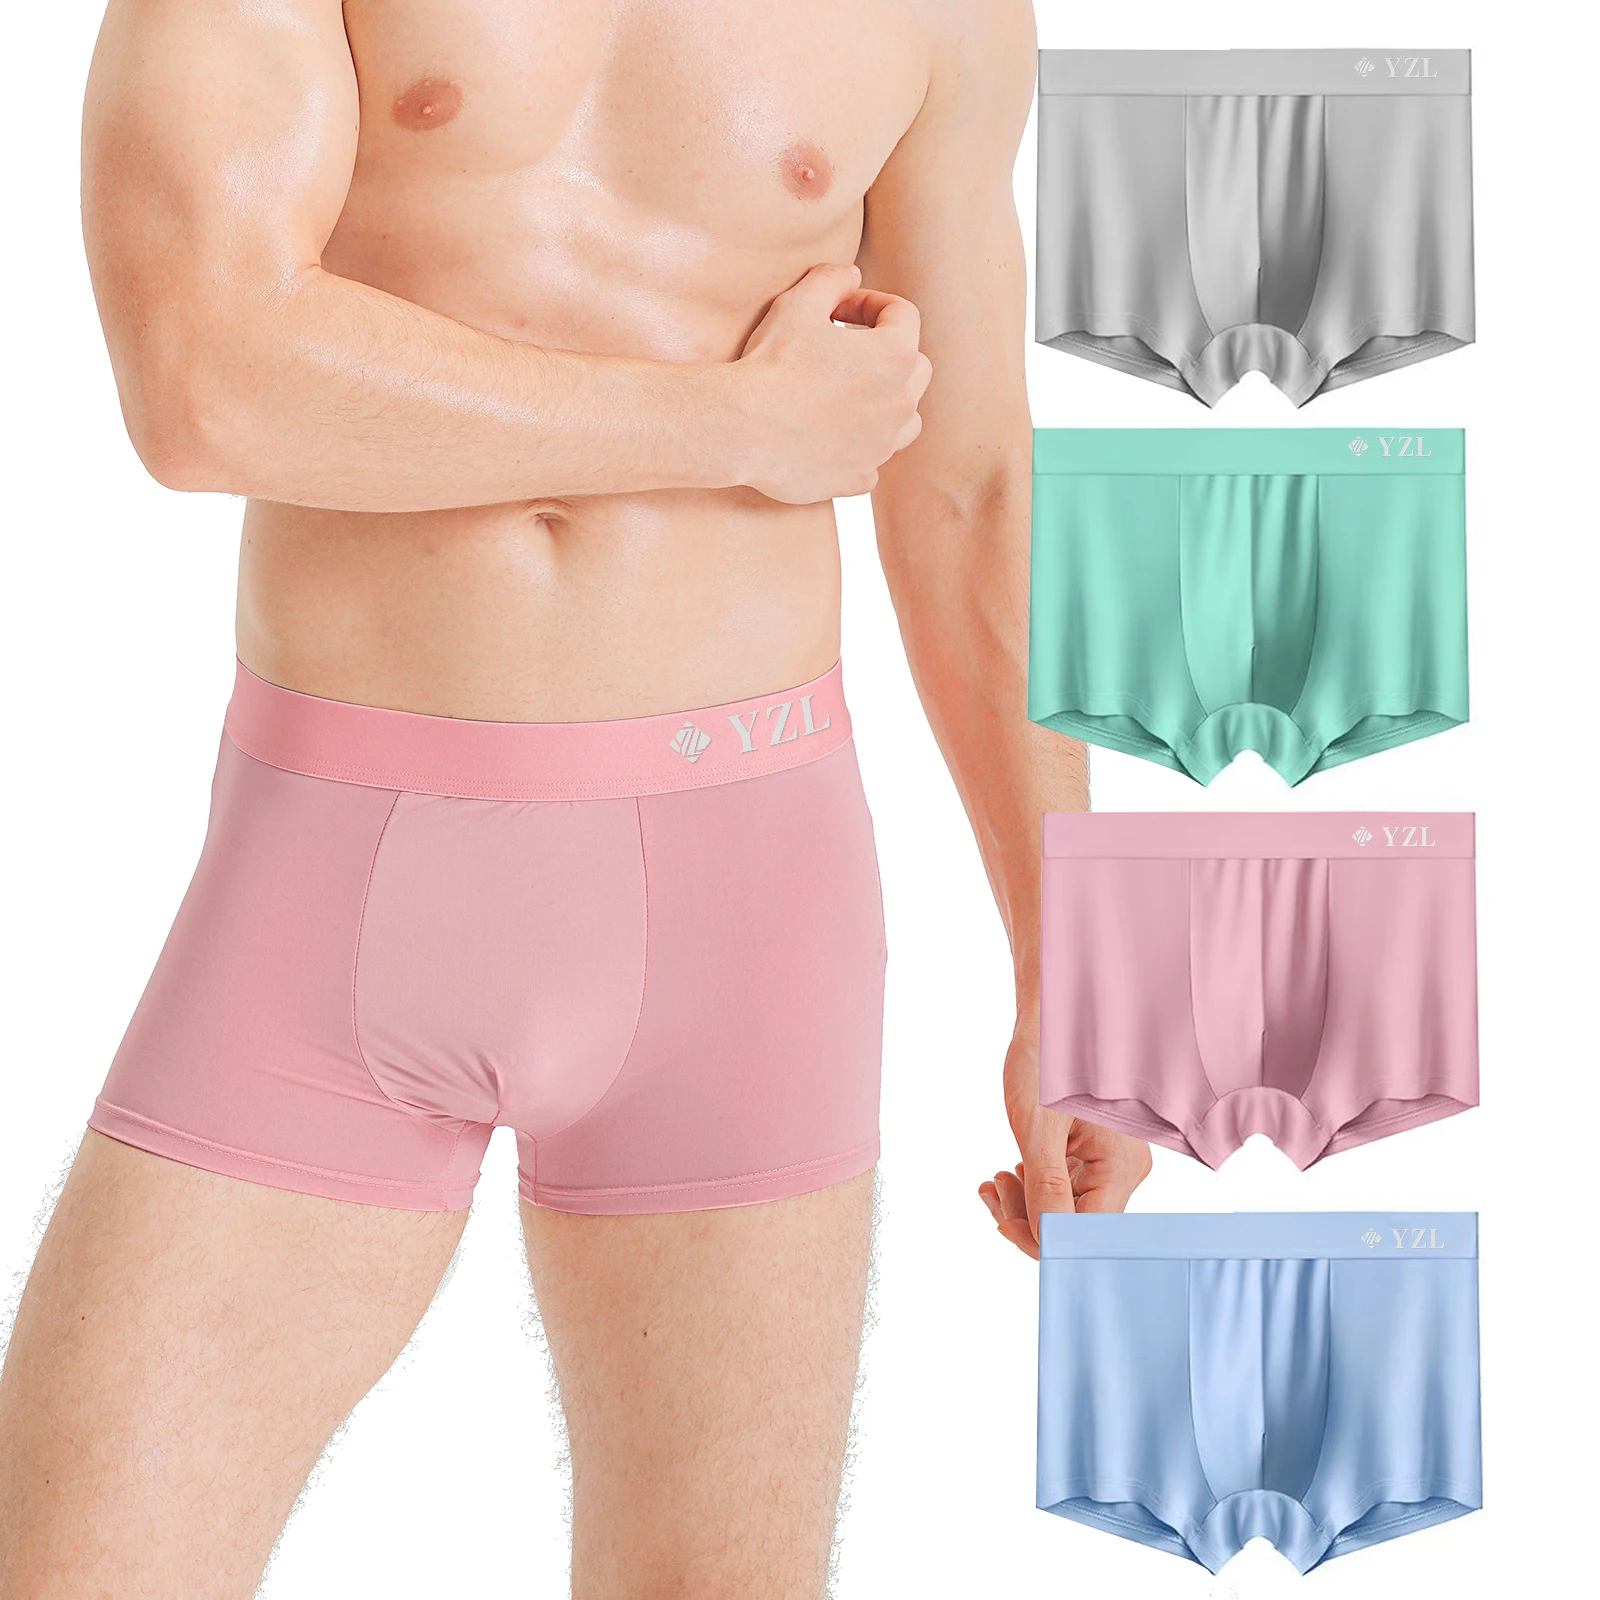 Men's Underwear ice Silk Flat Corner Shorts pants Summer Thin Antibacterial Modal Large Boys' Seamless Top Quality with Gift Box water based repair paint household latex paint for repair wall signs covered with graffiti hot antibacterial wall paint